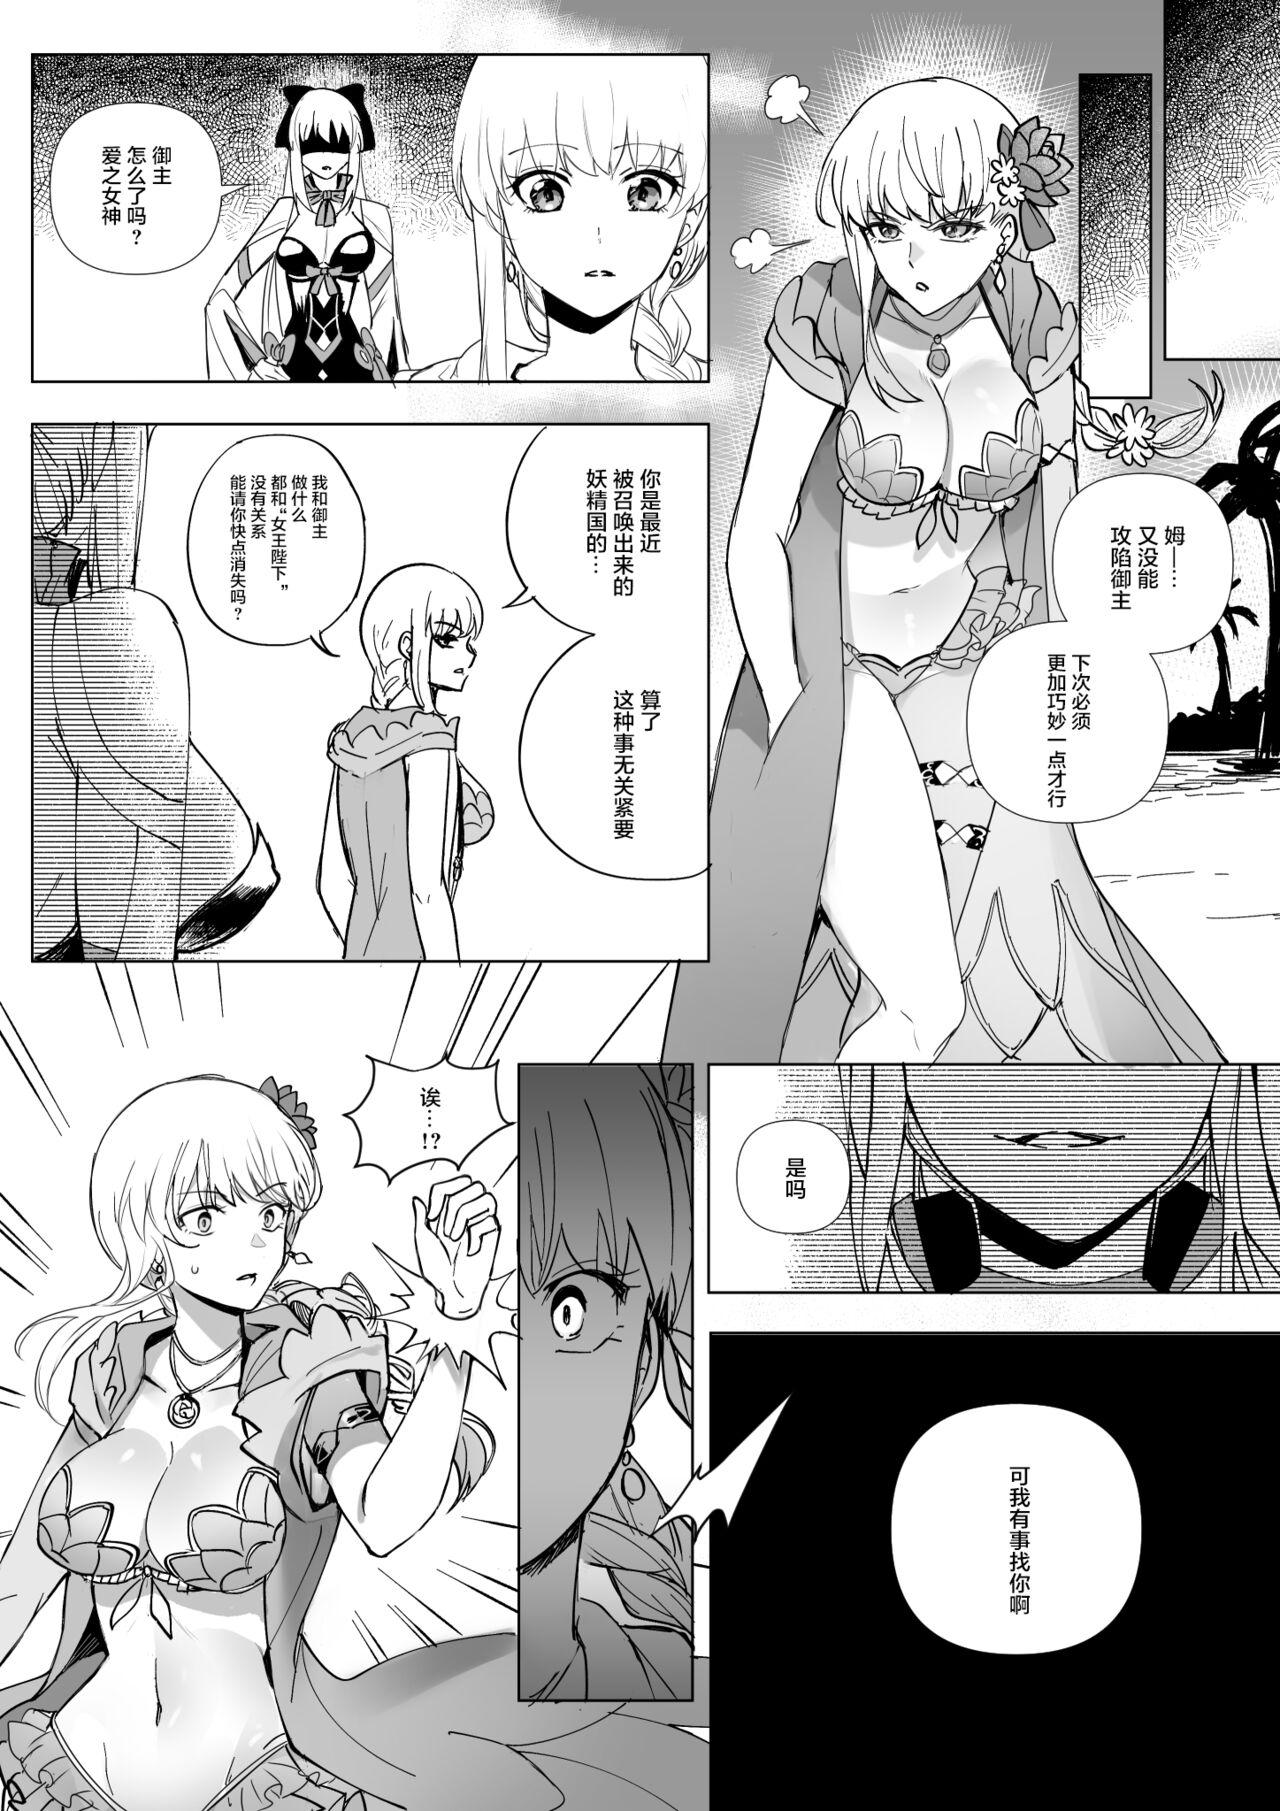 Japan FGO モルガン&水着カーマ憑依 - Fate grand order Hot Girl Pussy - Page 5